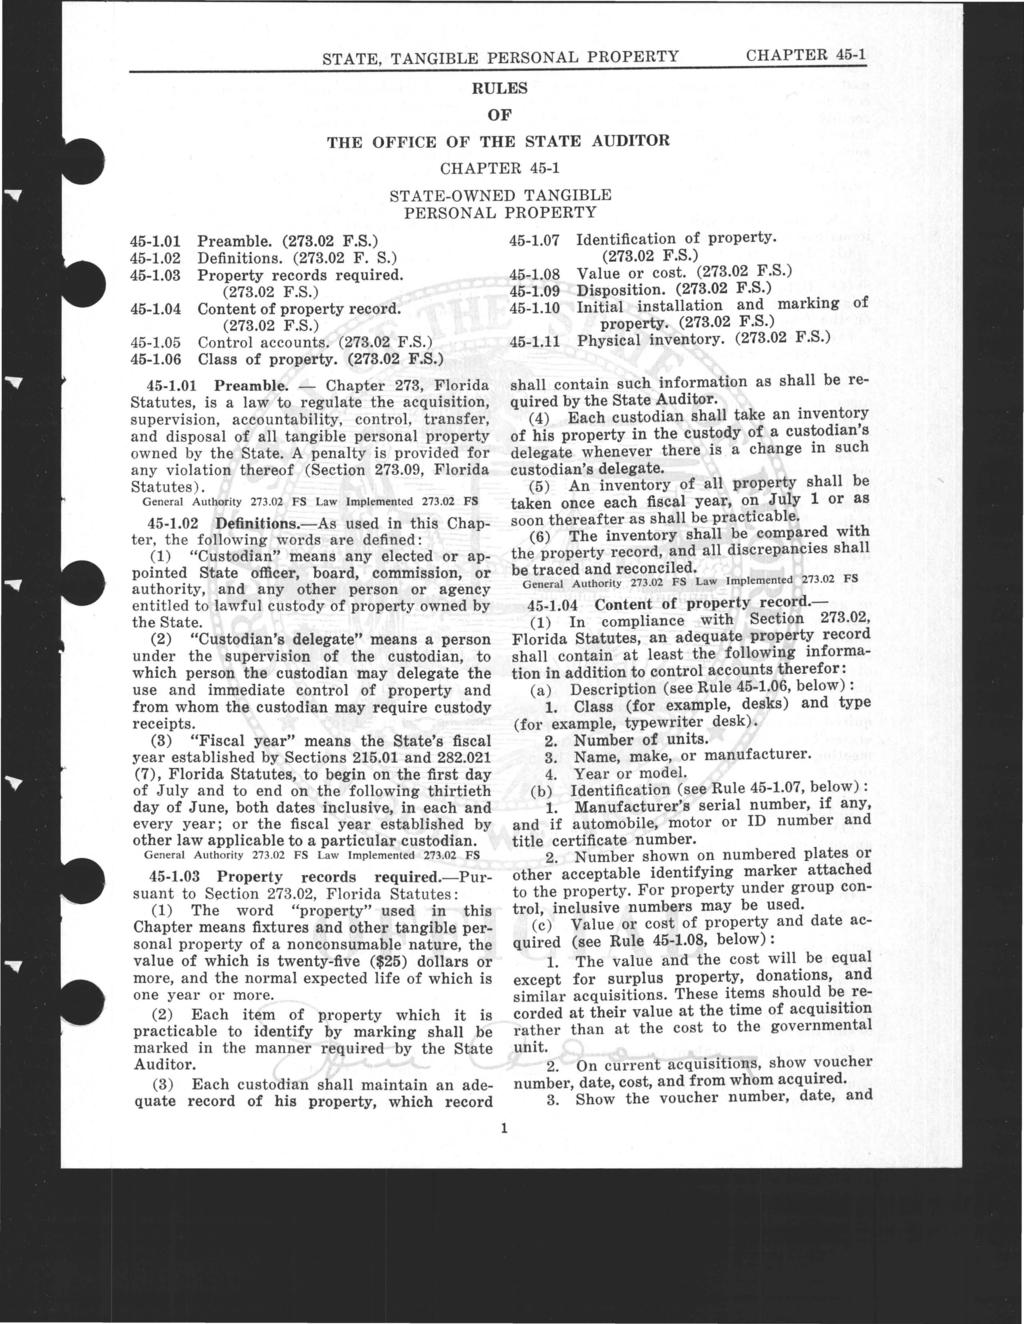 STATE, TANGIBLE PERSONAL PROPERTY CHAPTER 45-1 45-1.01 Preamble. (273.02 F.S.) 45-1.02 Definitions. (273.02 F. S.) 45-1.03 Property records required. (273.02 F.S.) 45-1.04 Content of property record.